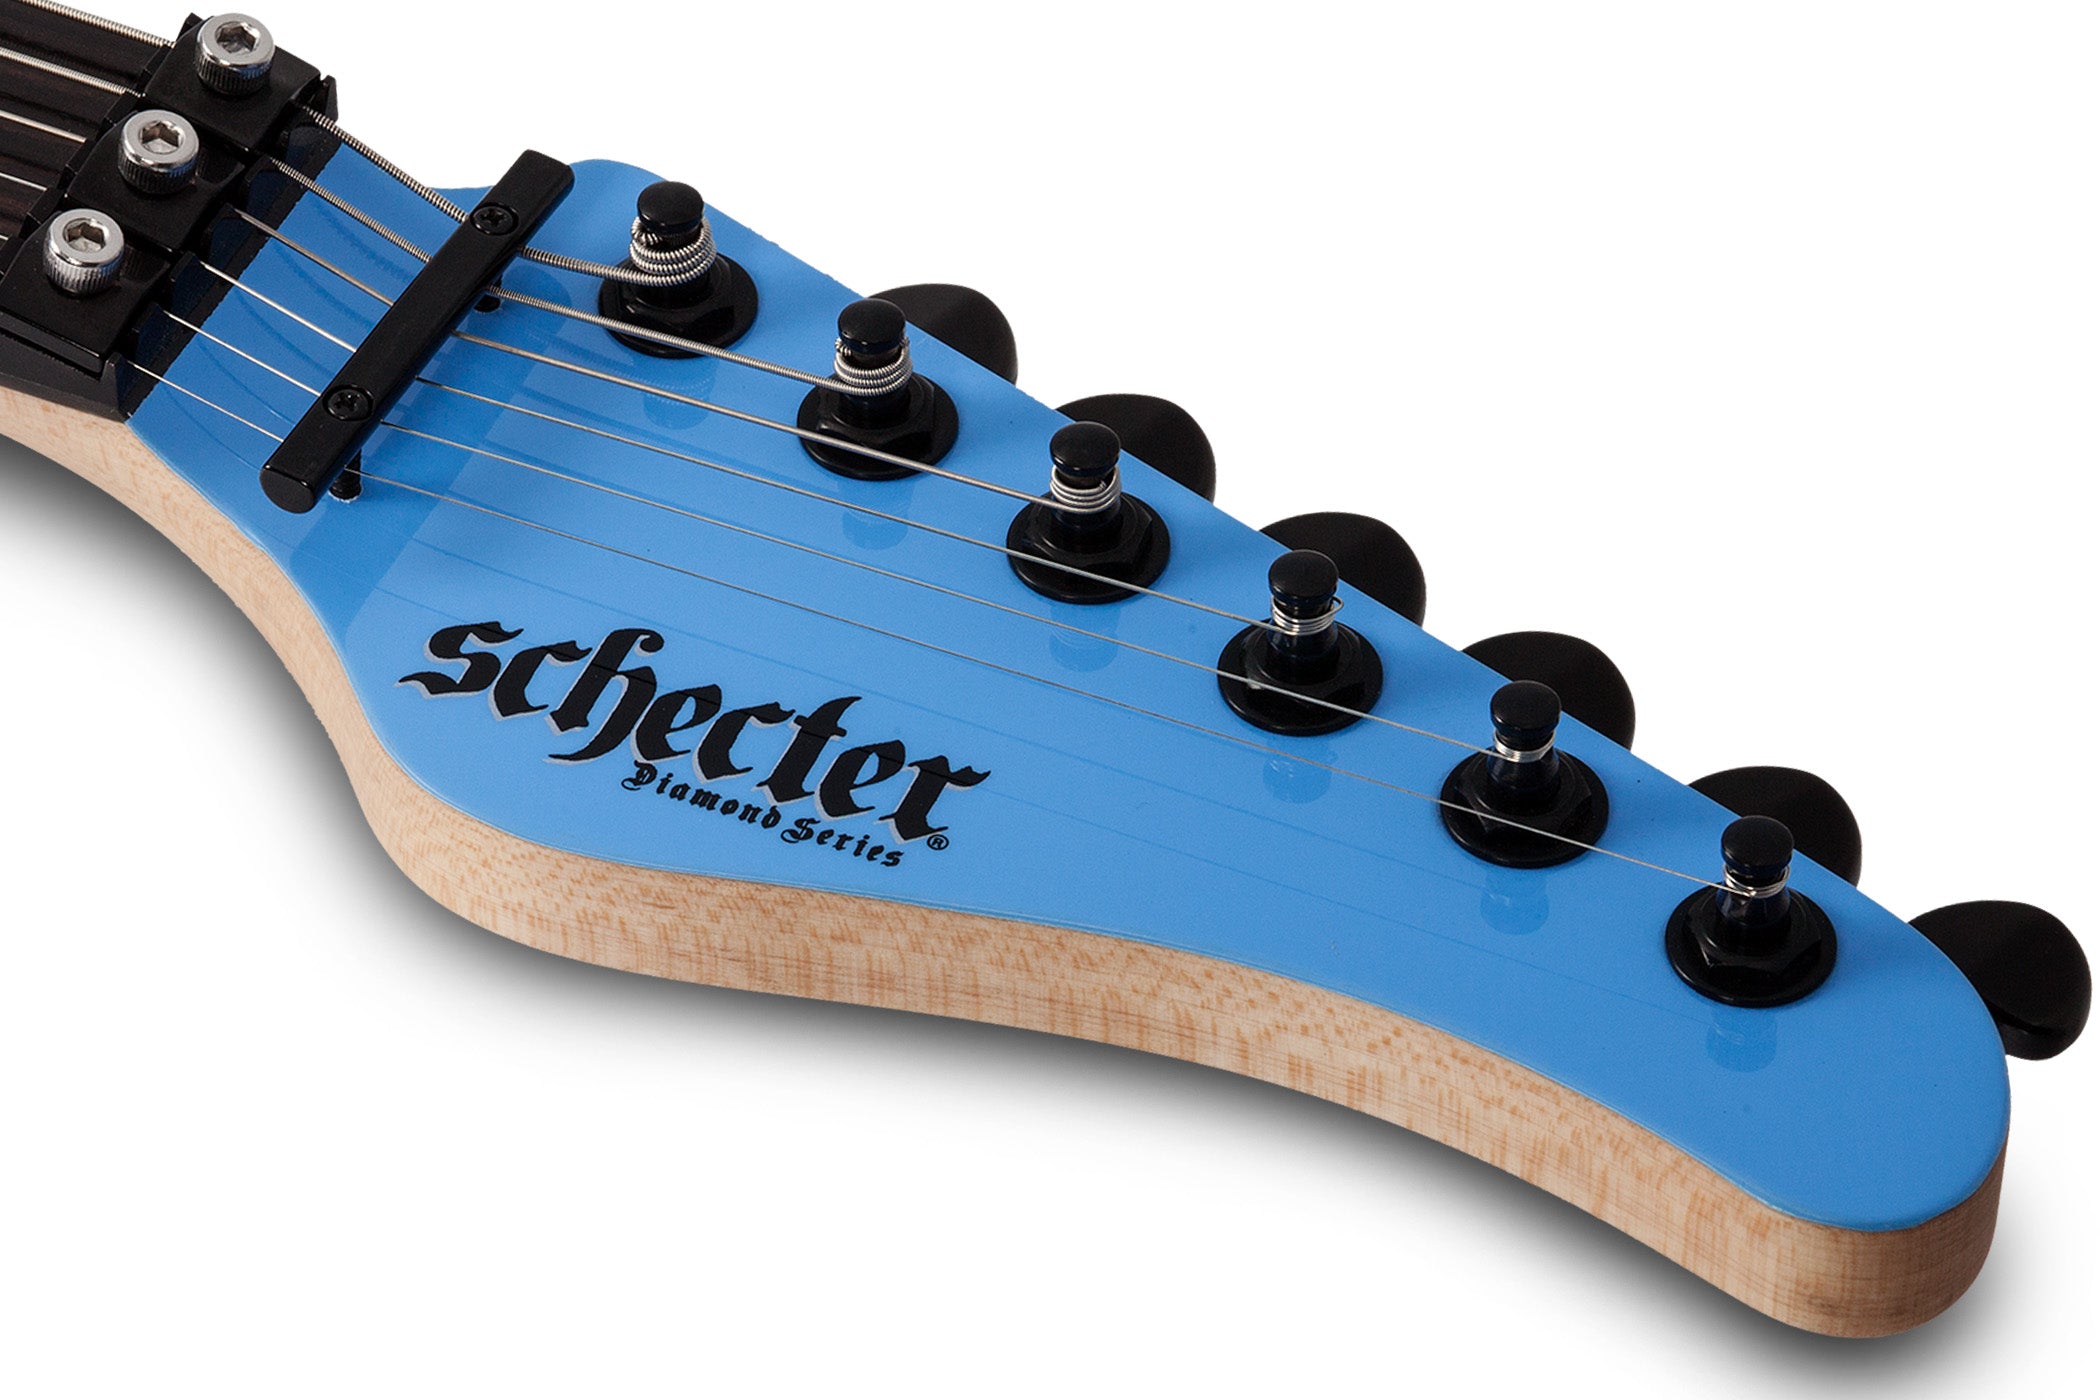 SCHECTER ELECTRIC GUITAR SUN VALLEY SUPER SHREDDAR FR-S RIVIERA BLUE (1288) MADE IN INDONESIA, SCHECTER, ELECTRIC GUITAR, schecter-electric-guitar-sunvalley-ss-fr-s-rblue, ZOSO MUSIC SDN BHD